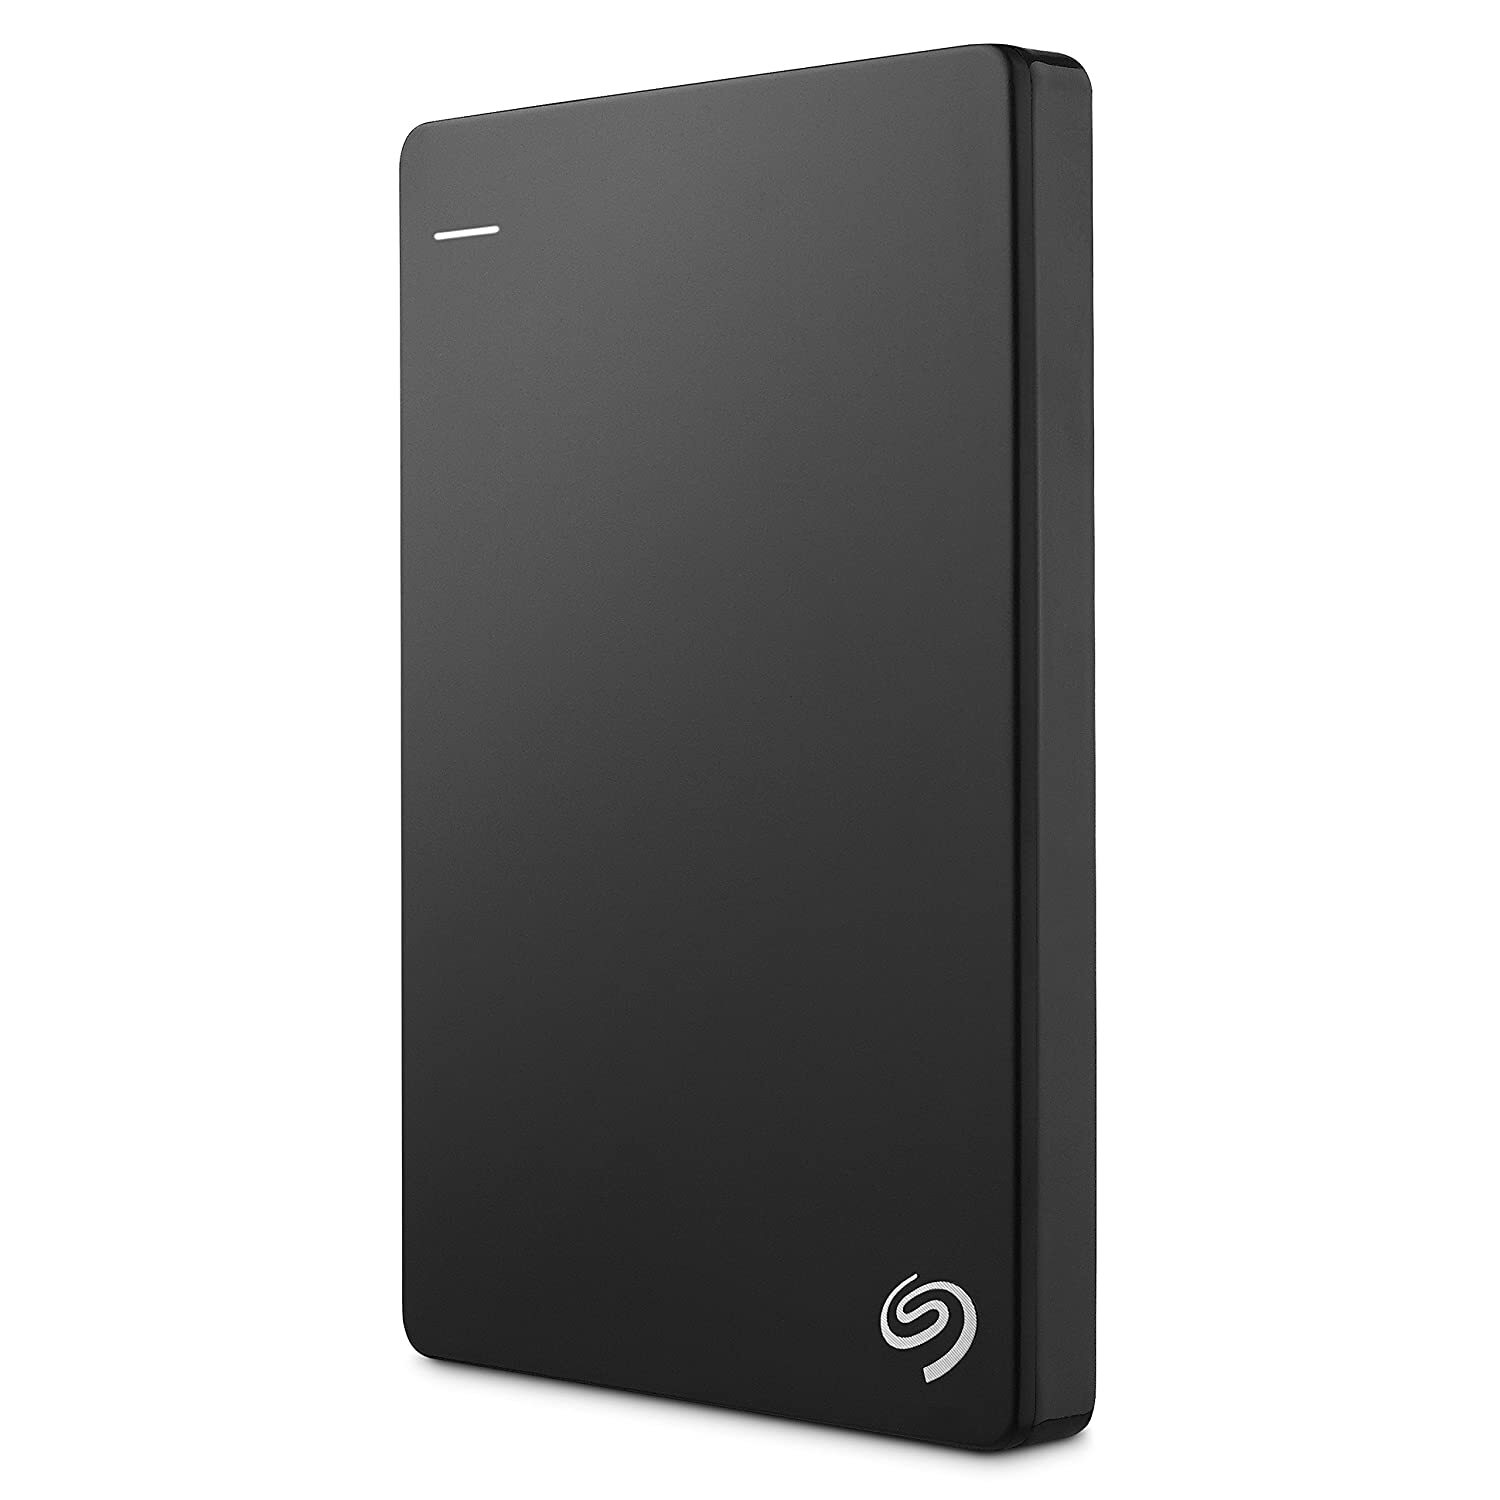 Seagate 2TB Backup Plus Slim (Black) USB 3.0 External Hard Drive for PC/Mac with 2 Months Free Adobe Photography Plan